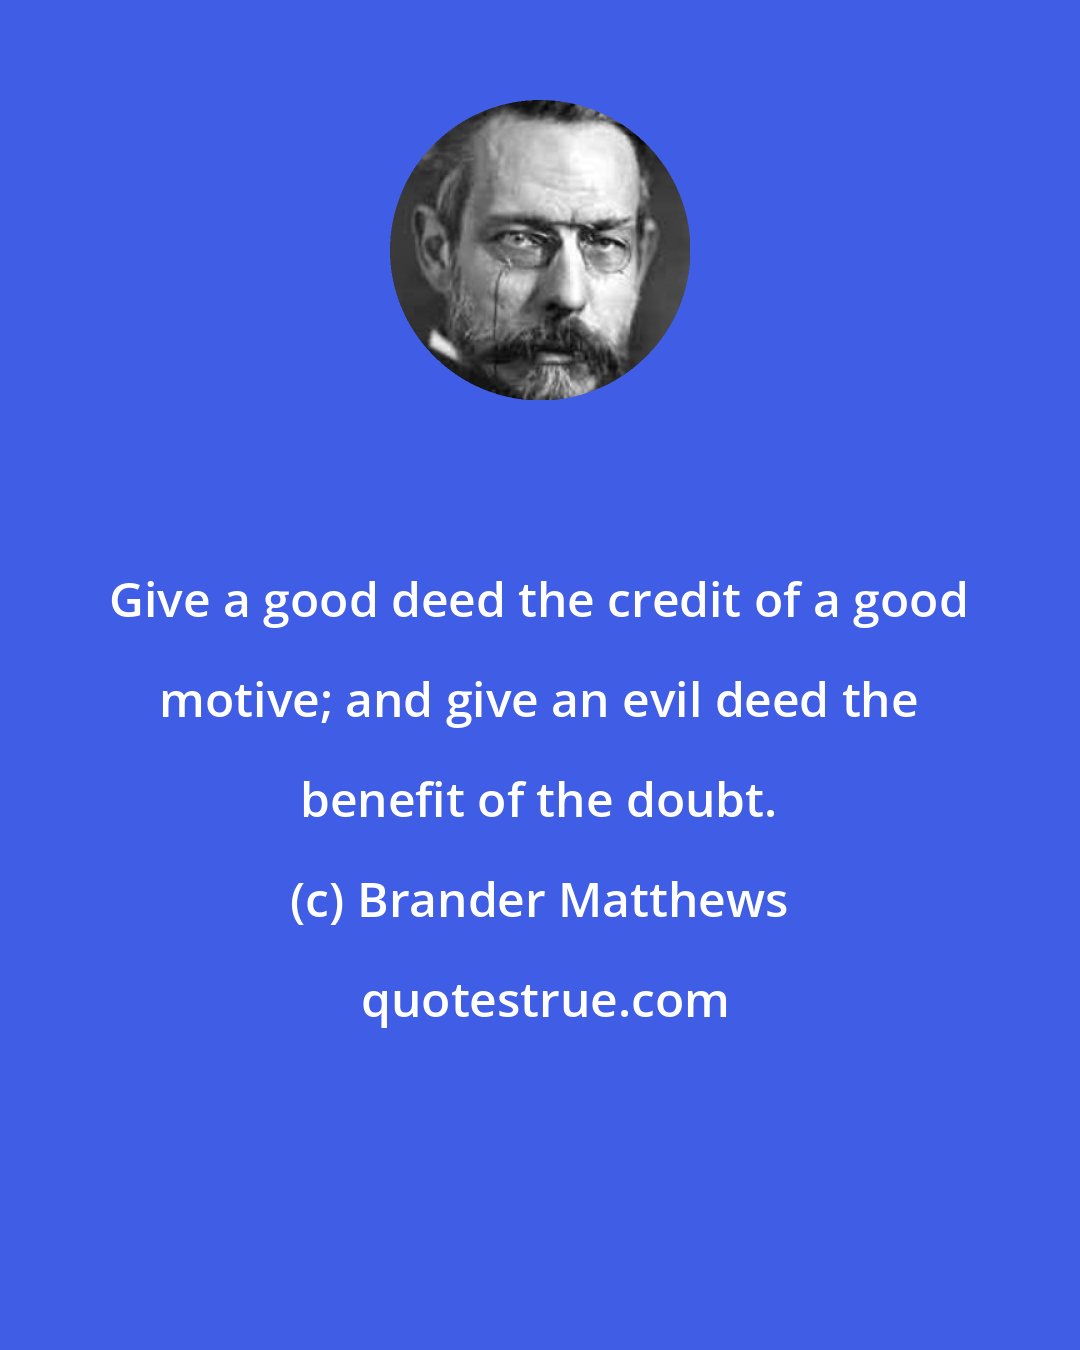 Brander Matthews: Give a good deed the credit of a good motive; and give an evil deed the benefit of the doubt.